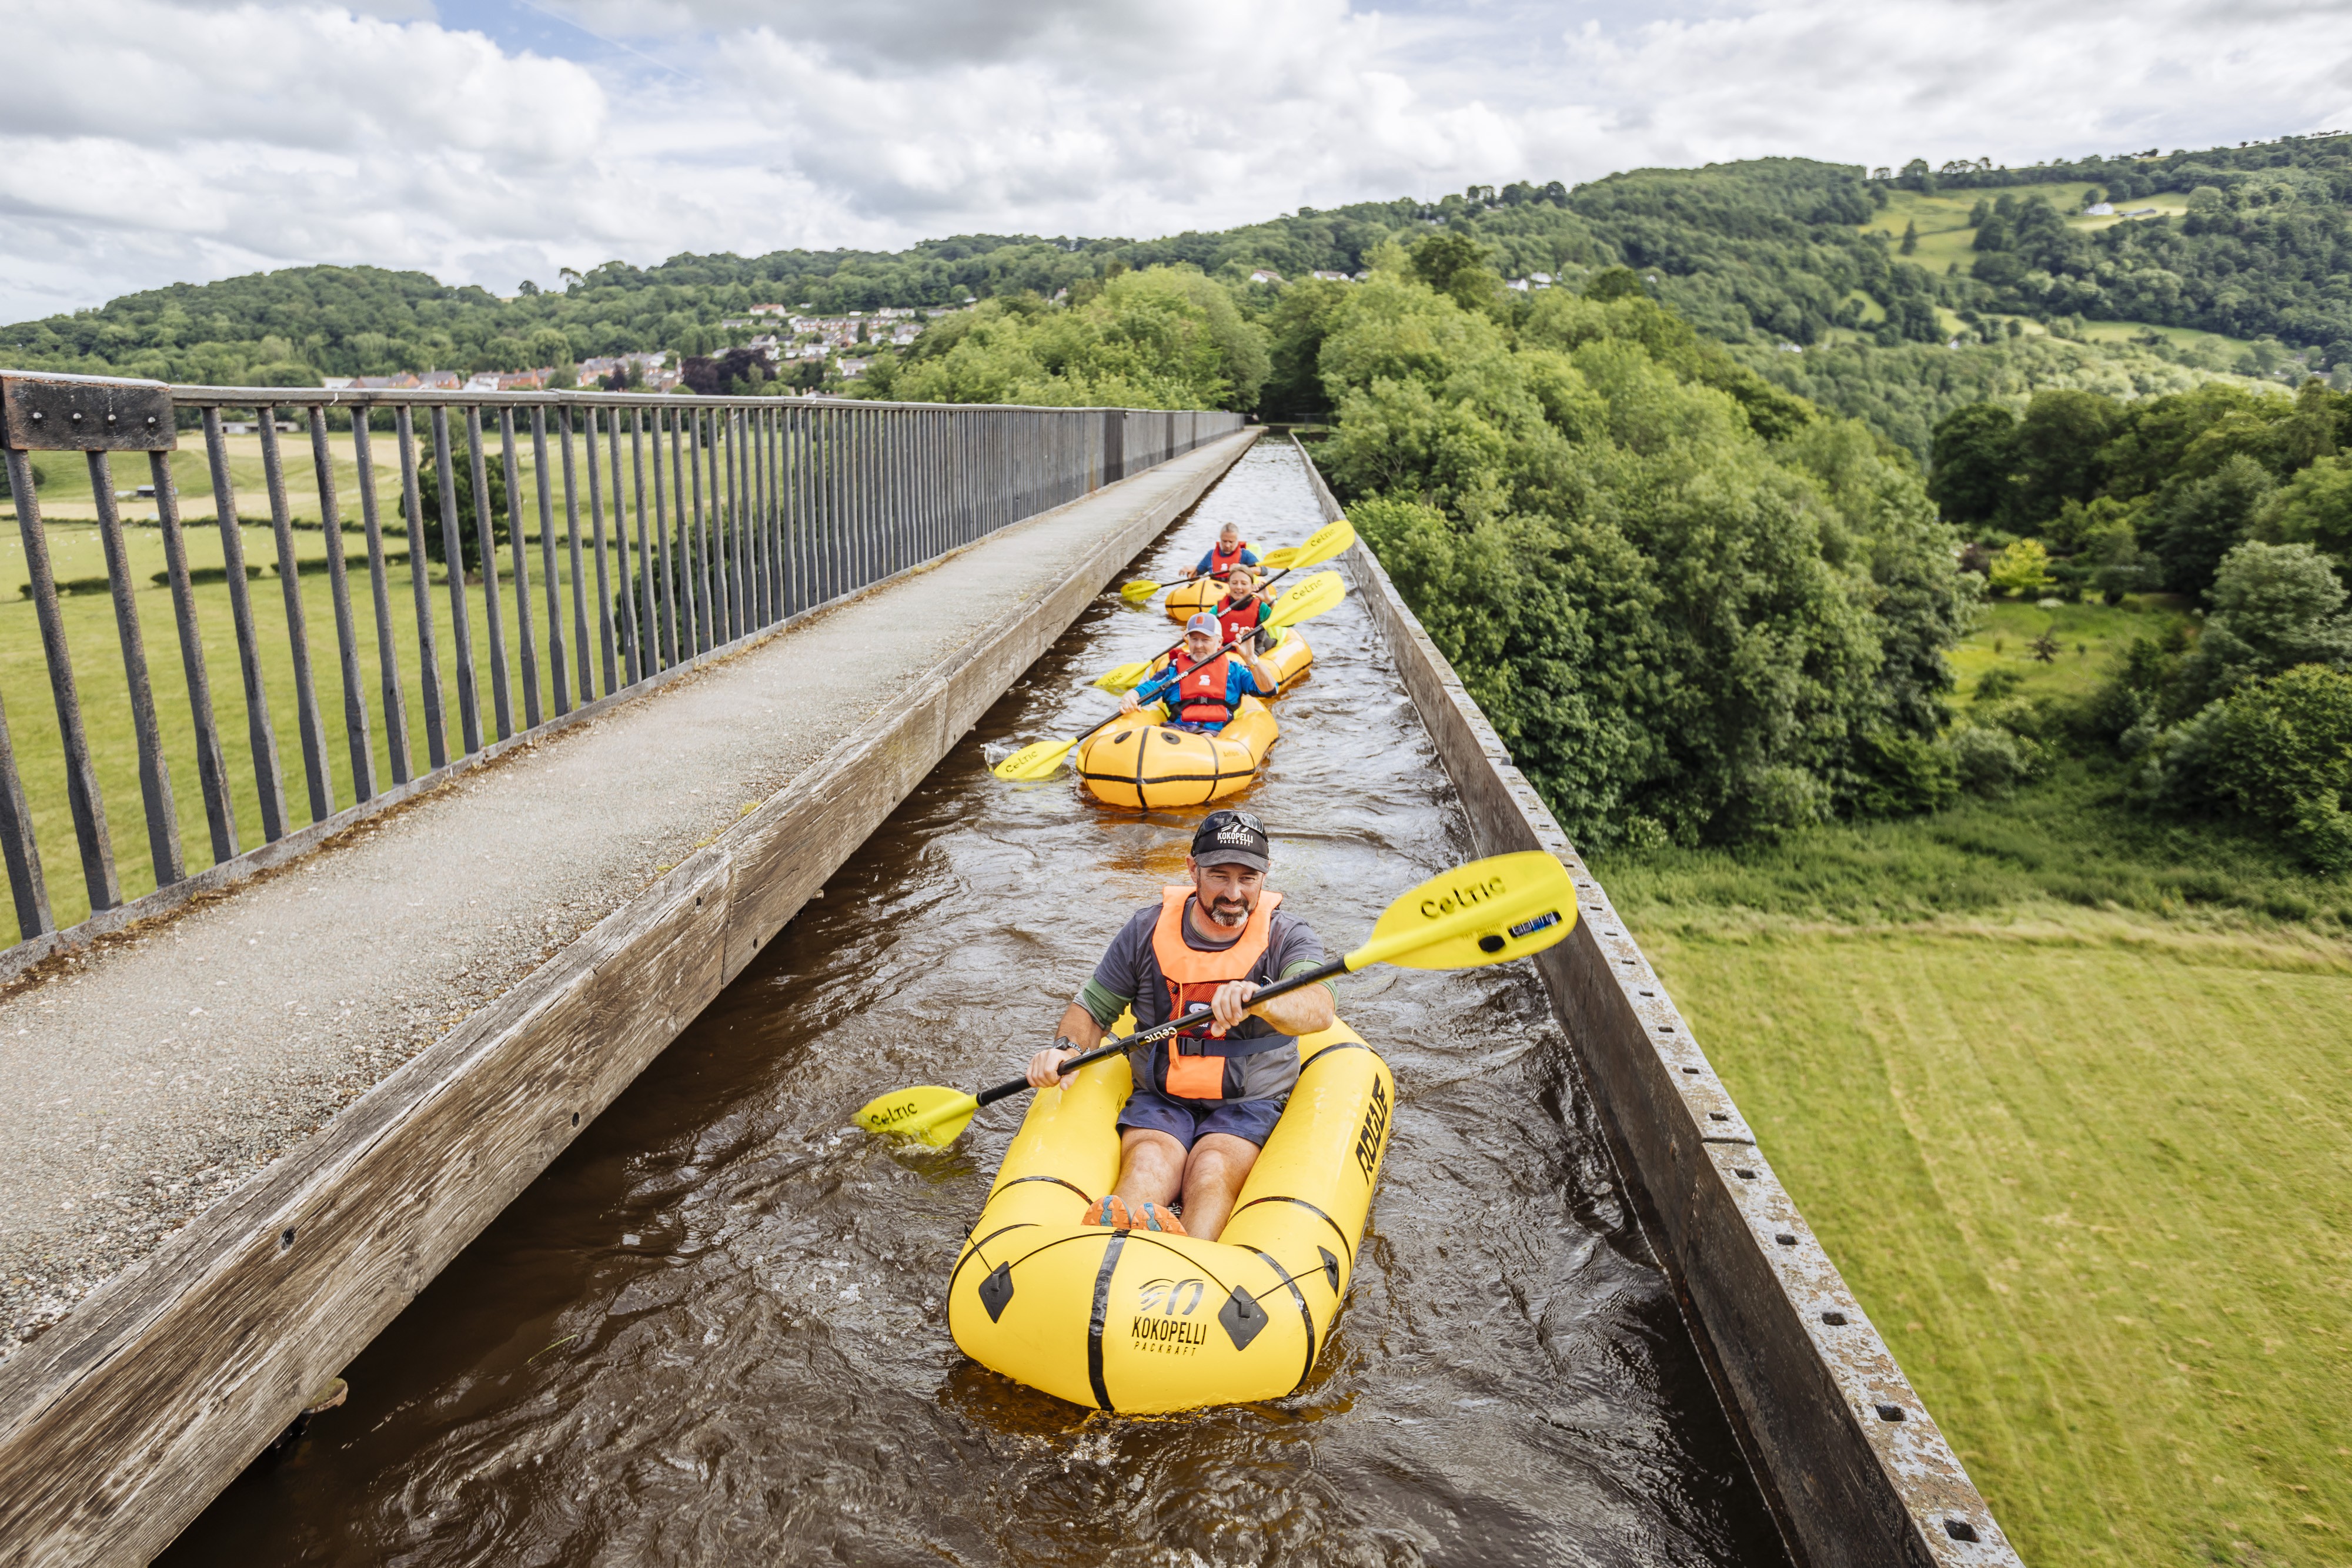 Packrafting over the Pontcysyllte Aqueduct in North Wales. Photo: Tom Martin